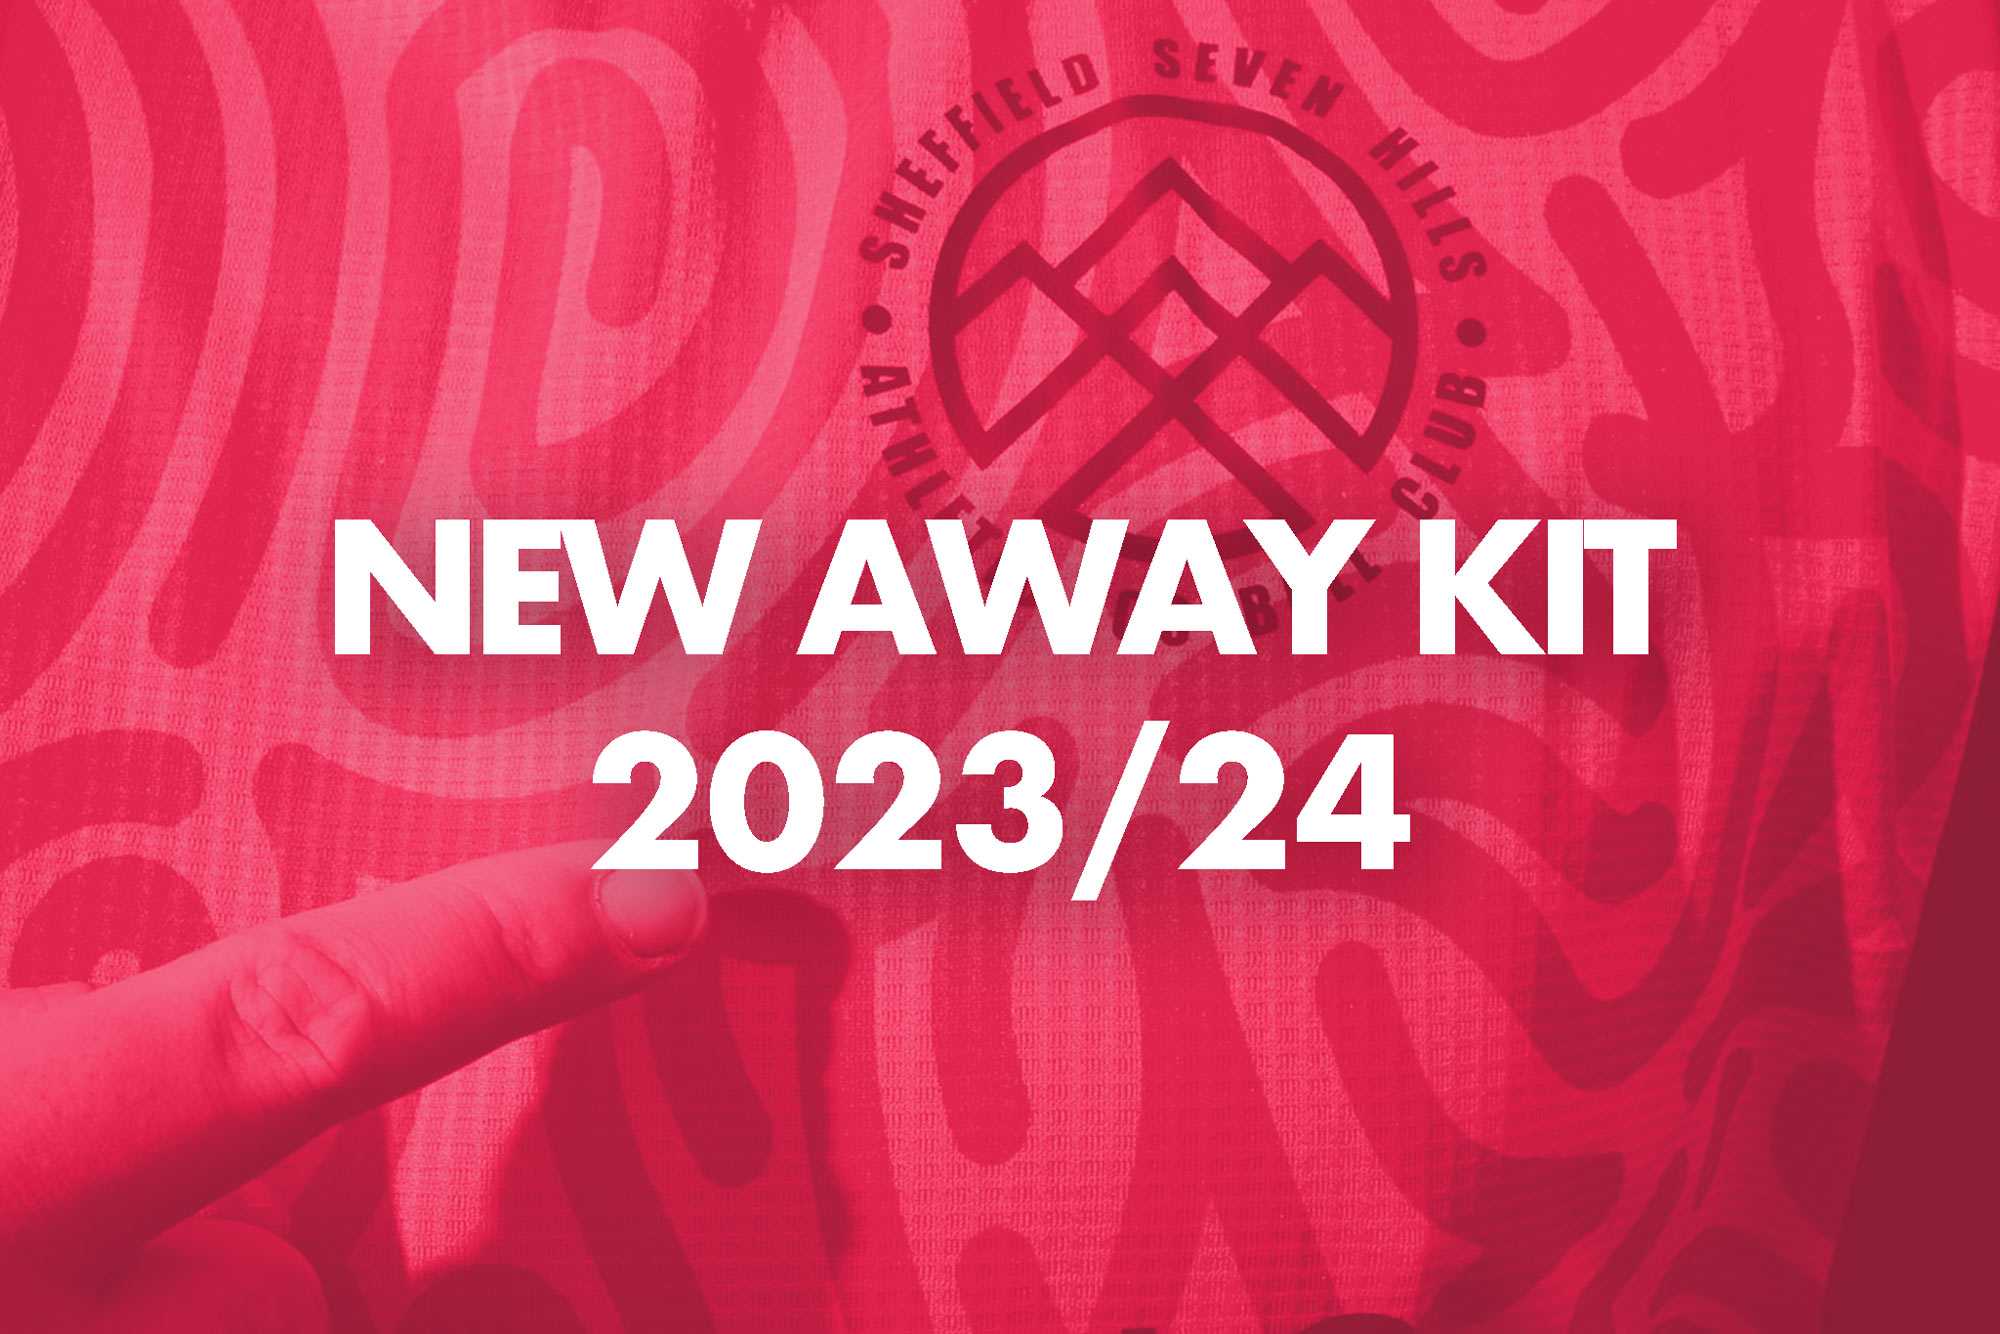 Announcing our new away kit